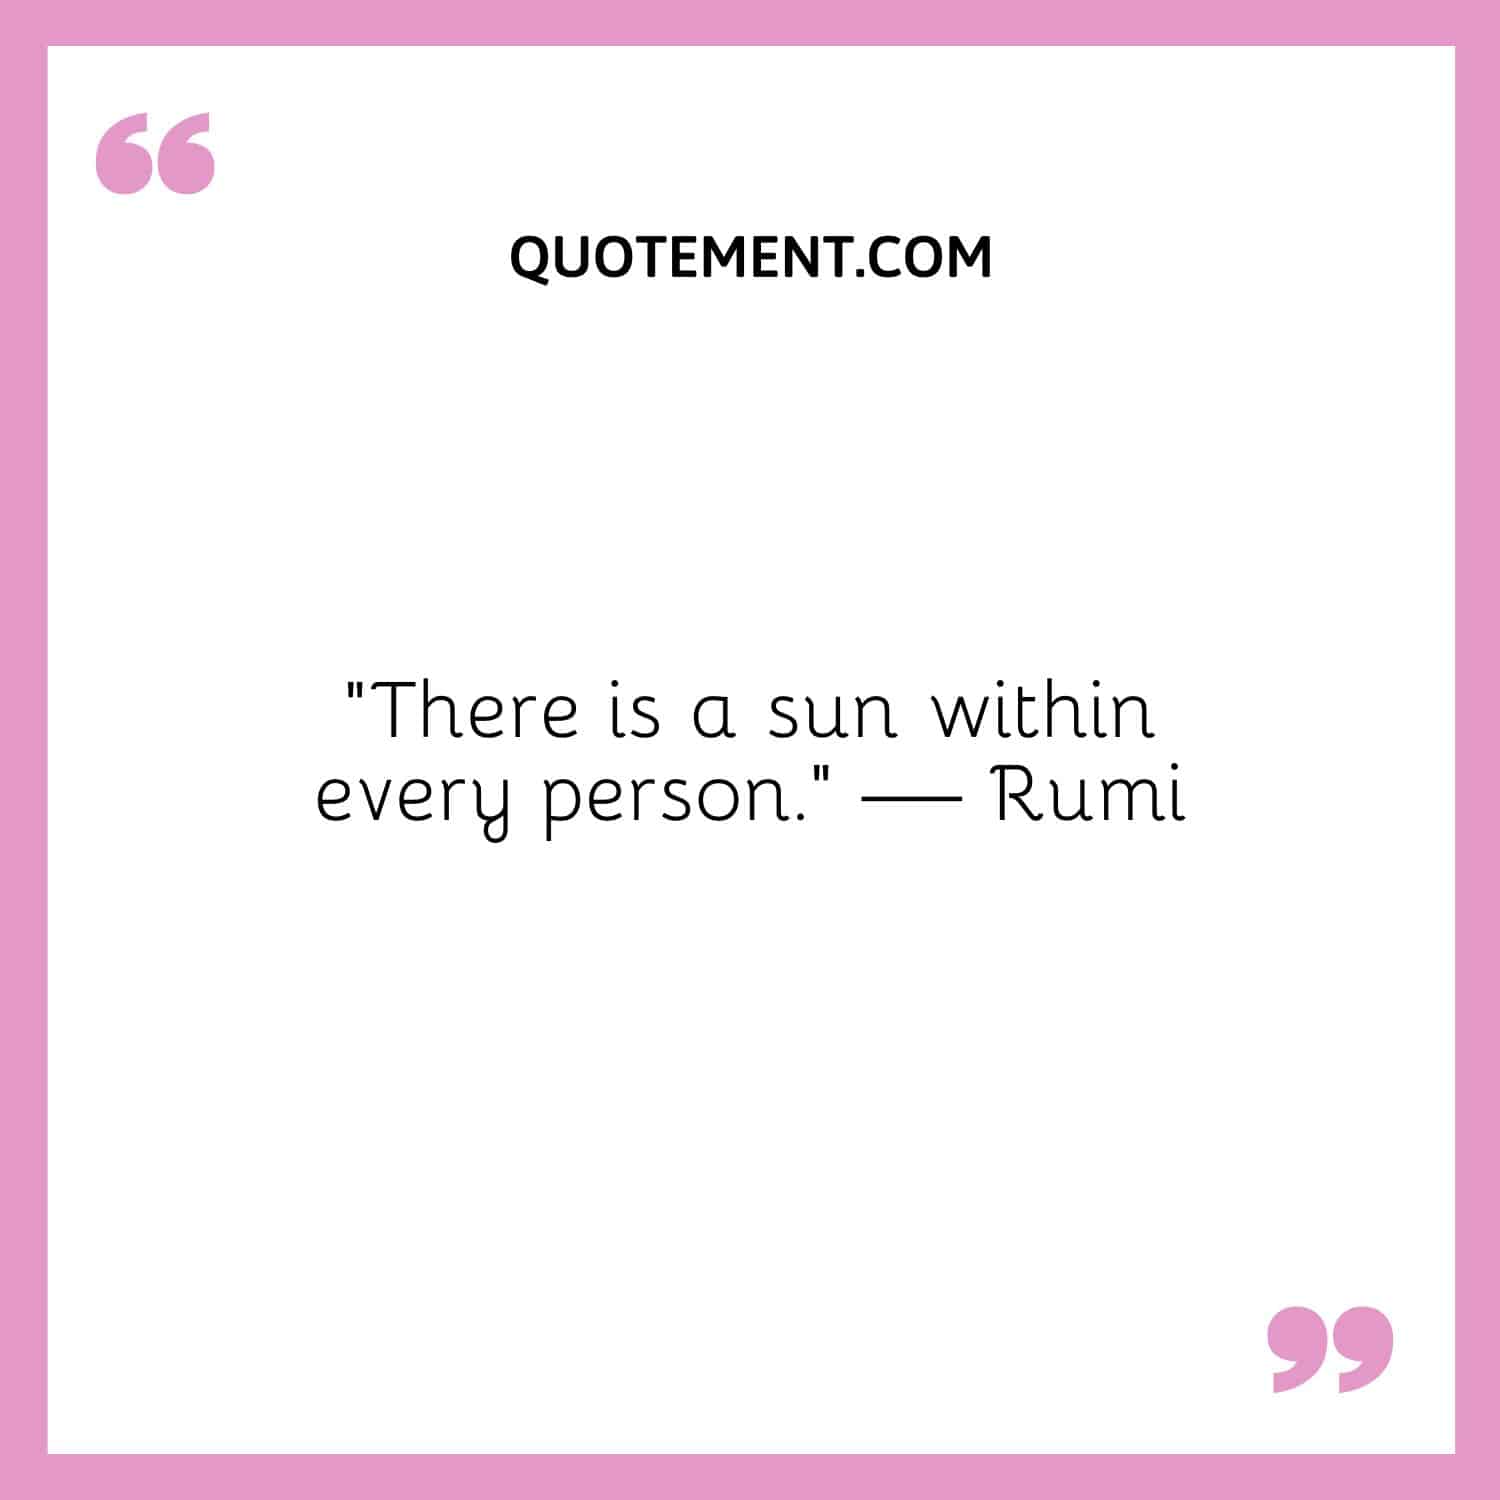 There is a sun within every person